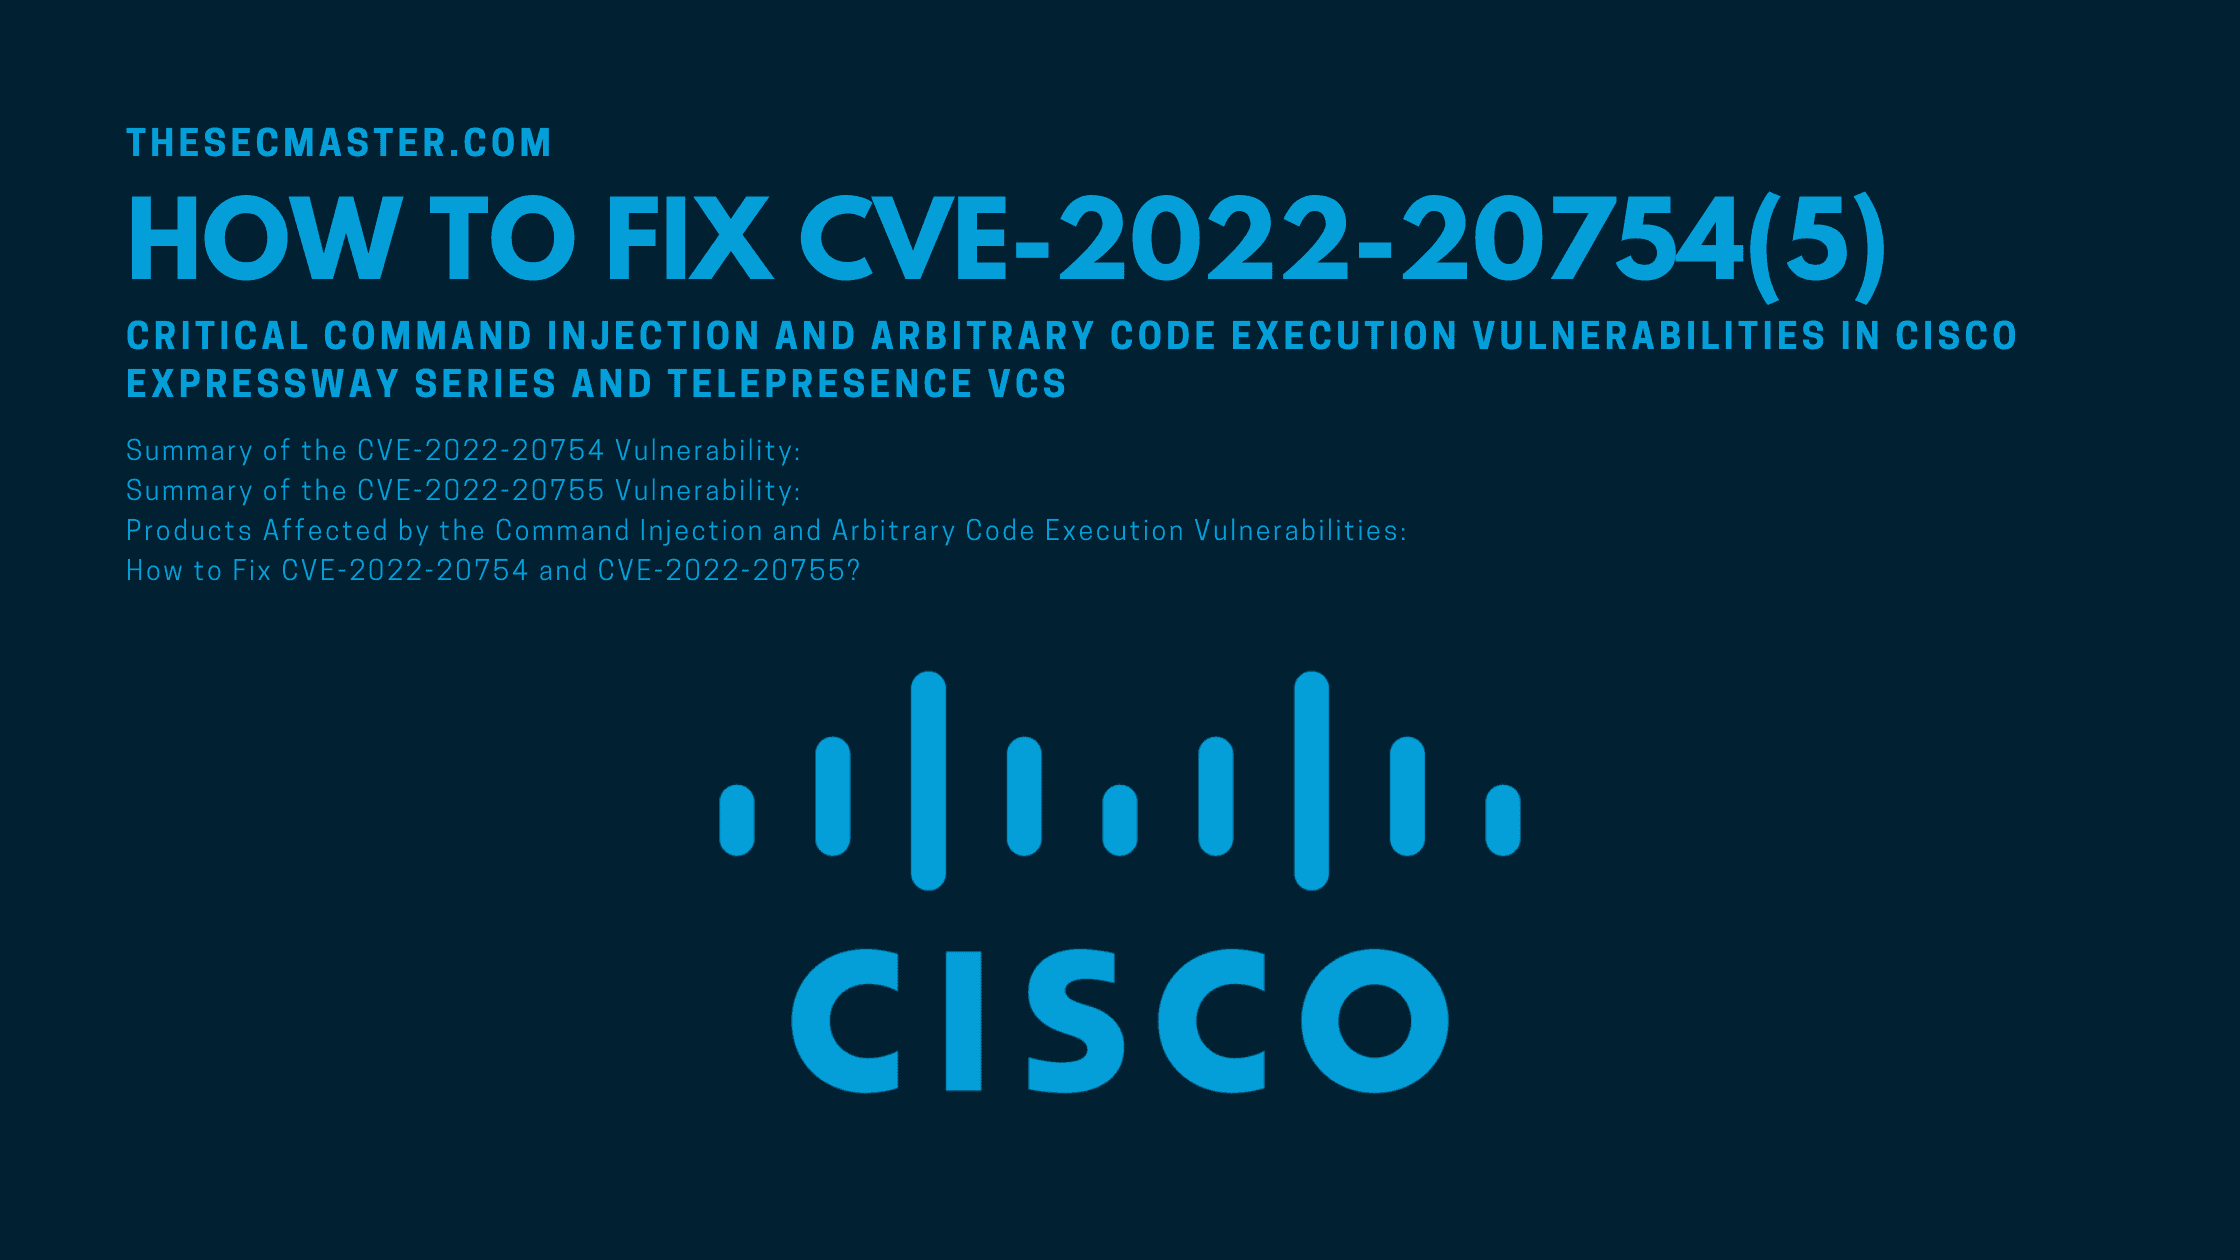 How To Fix Cve 2022 207545 Critical Command Injection And Arbitrary Code Execution Vulnerabilities In Cisco Expressway Series And Telepresence Vcs